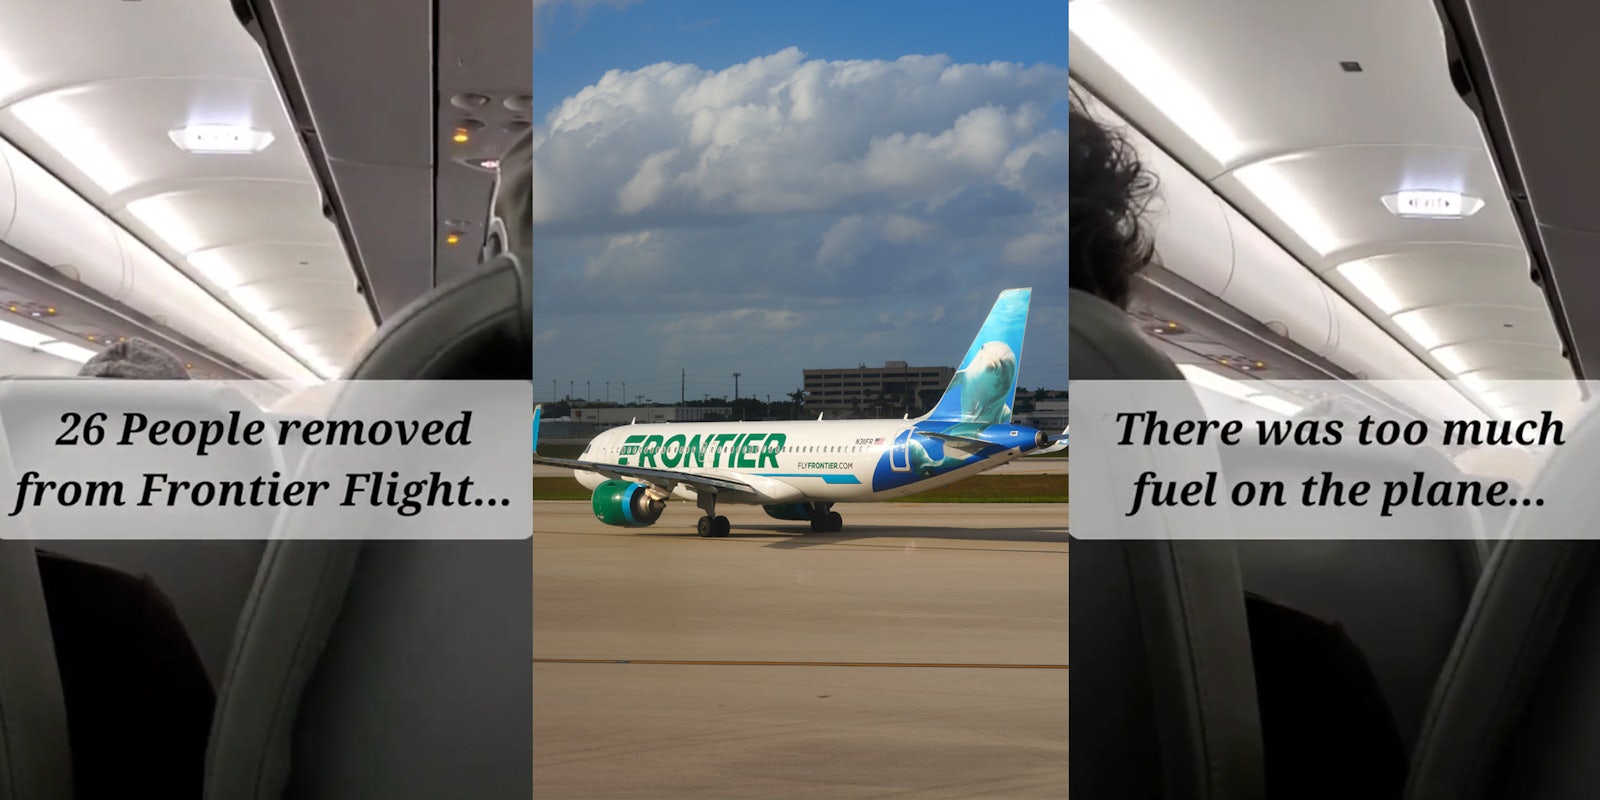 Frontier airlines pov of passenger with caption '26 people removed from Frontier Flight...' (l) Frontier airlines plane in runway (c) Frontier airlines pov of passenger with caption 'There was too much fuel on the plane' (r)